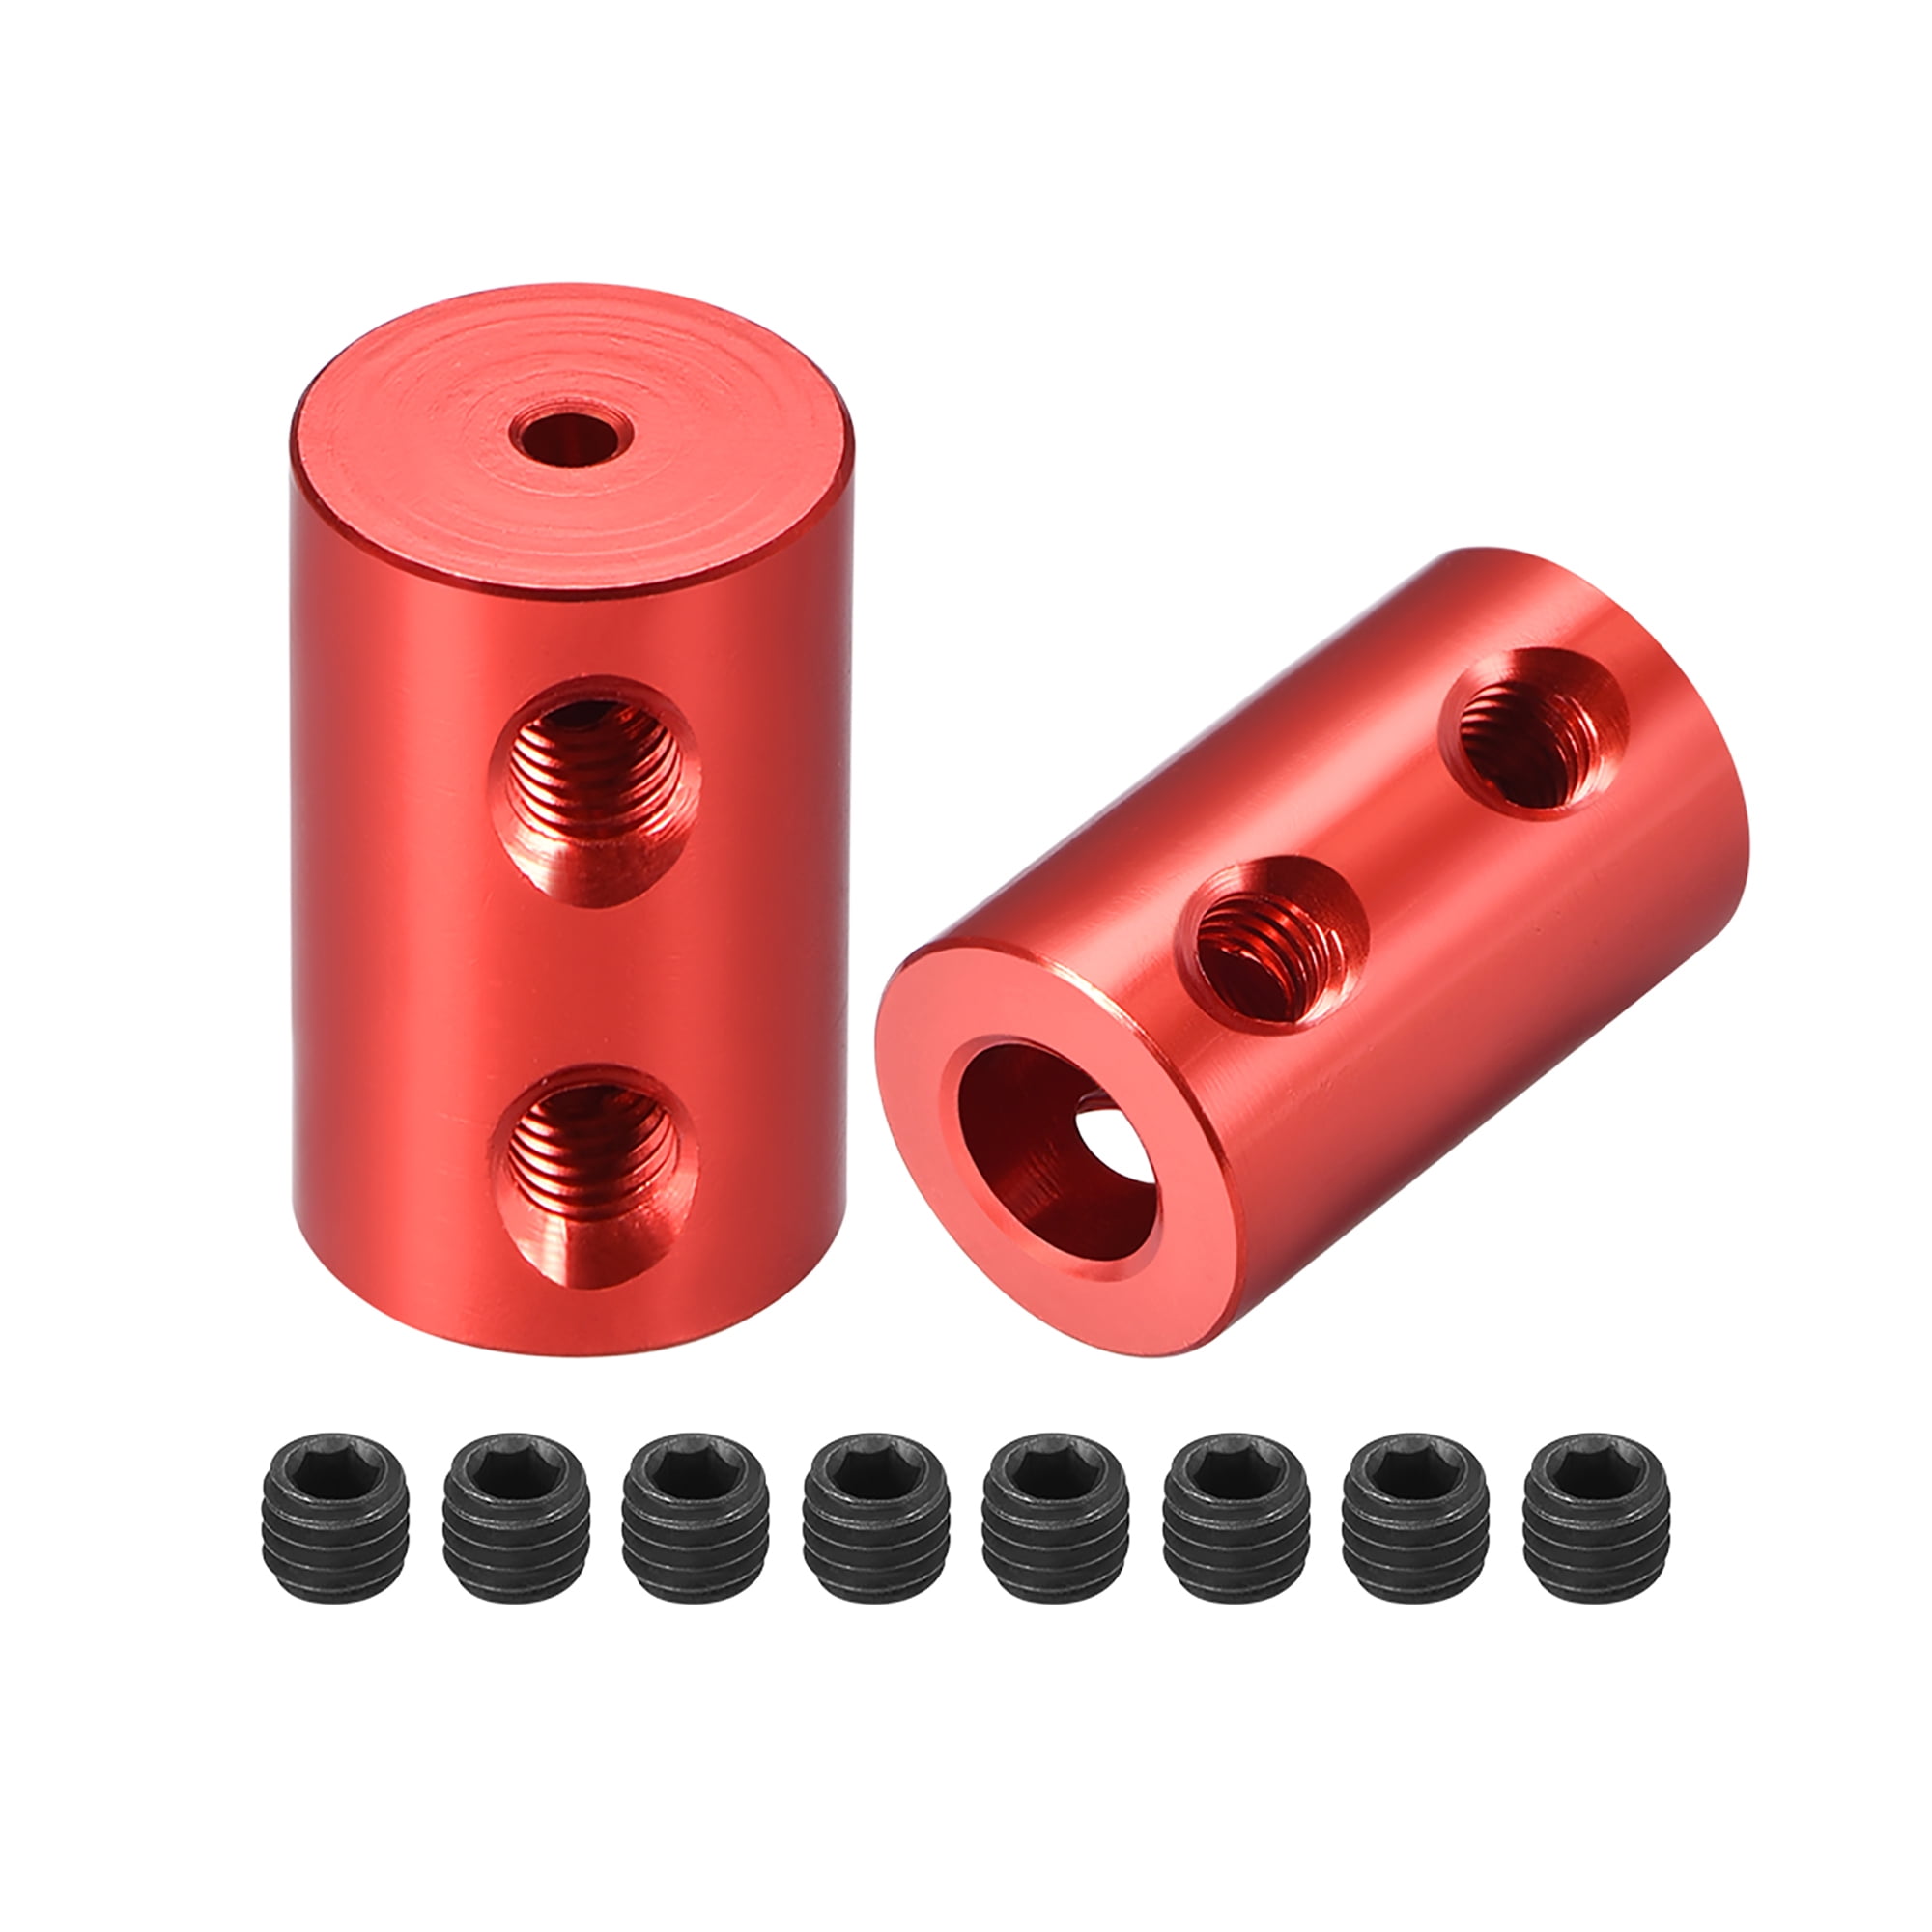 Shaft Coupling 2mm to 6mm Bore L20xD12 Robot Motor Wheel Rigid Coupler Red 